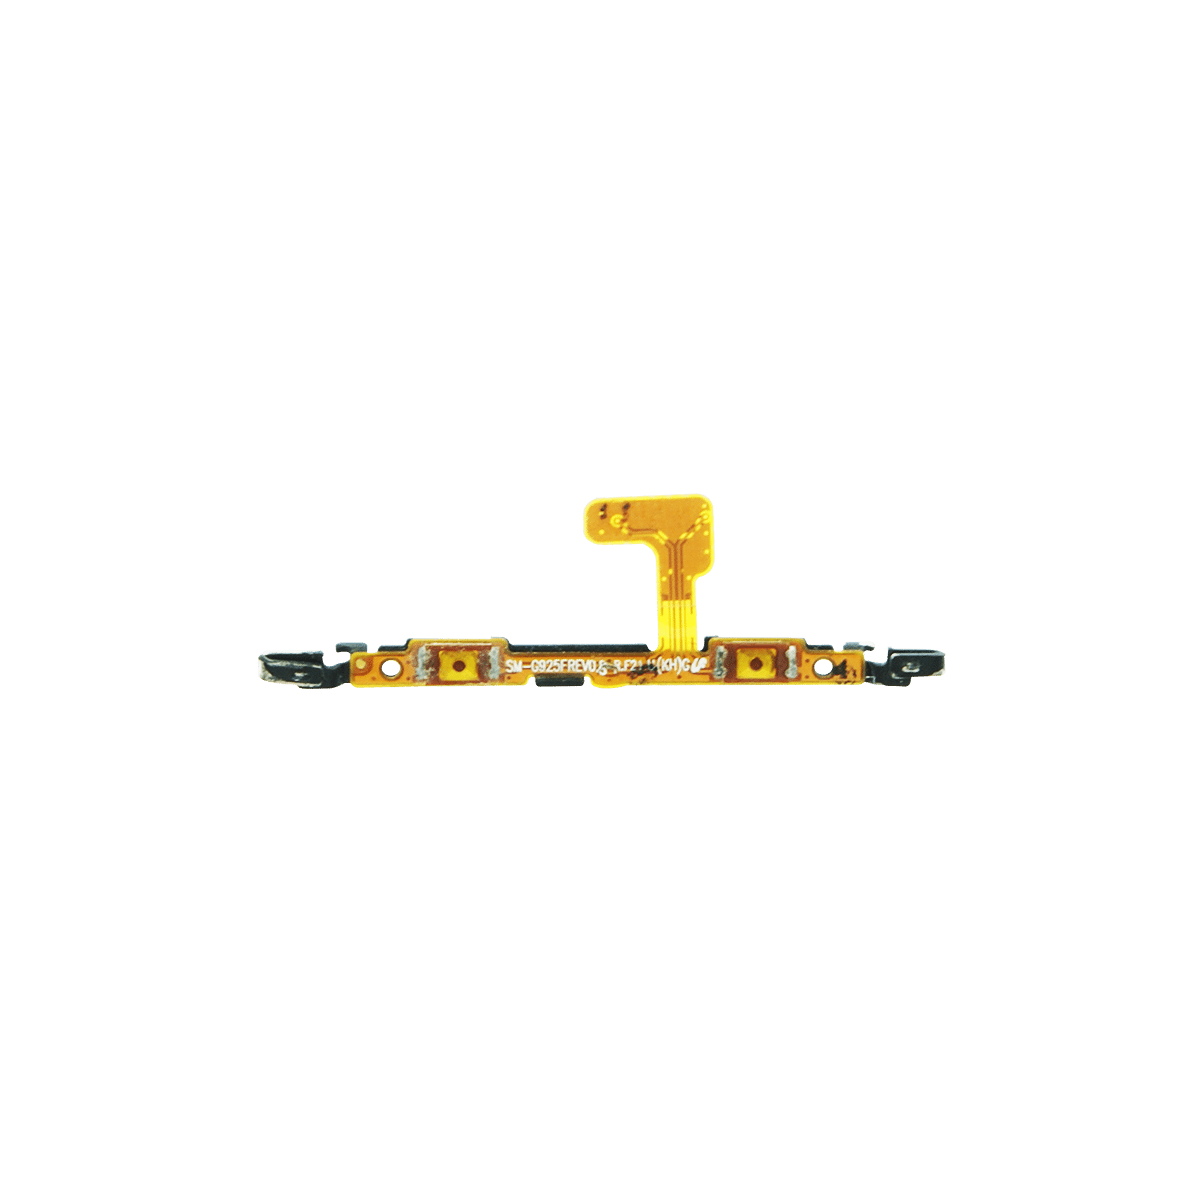 Samsung Galaxy S6 Edge Volume Buttons Flex Cable Replacement